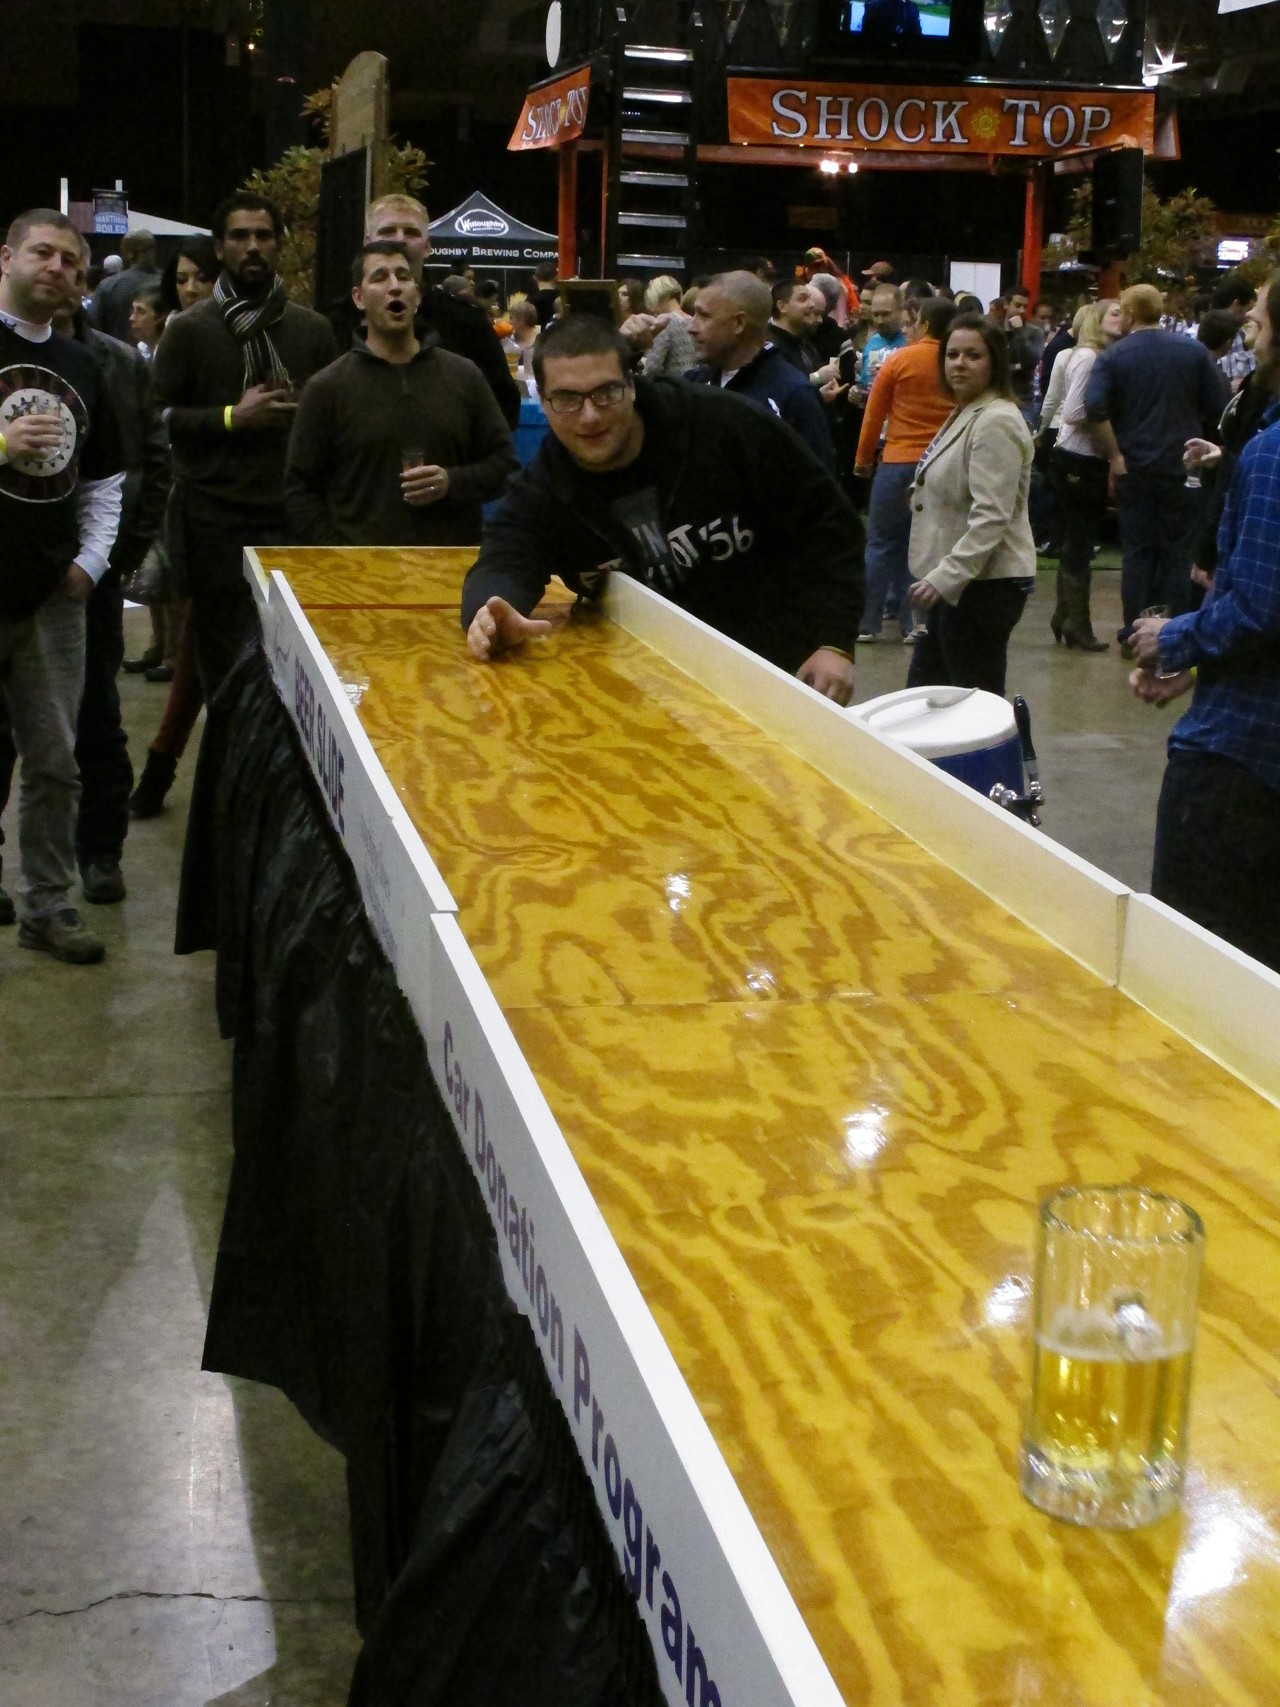 15 photos from the International Beer Fest Grand Tasting Session